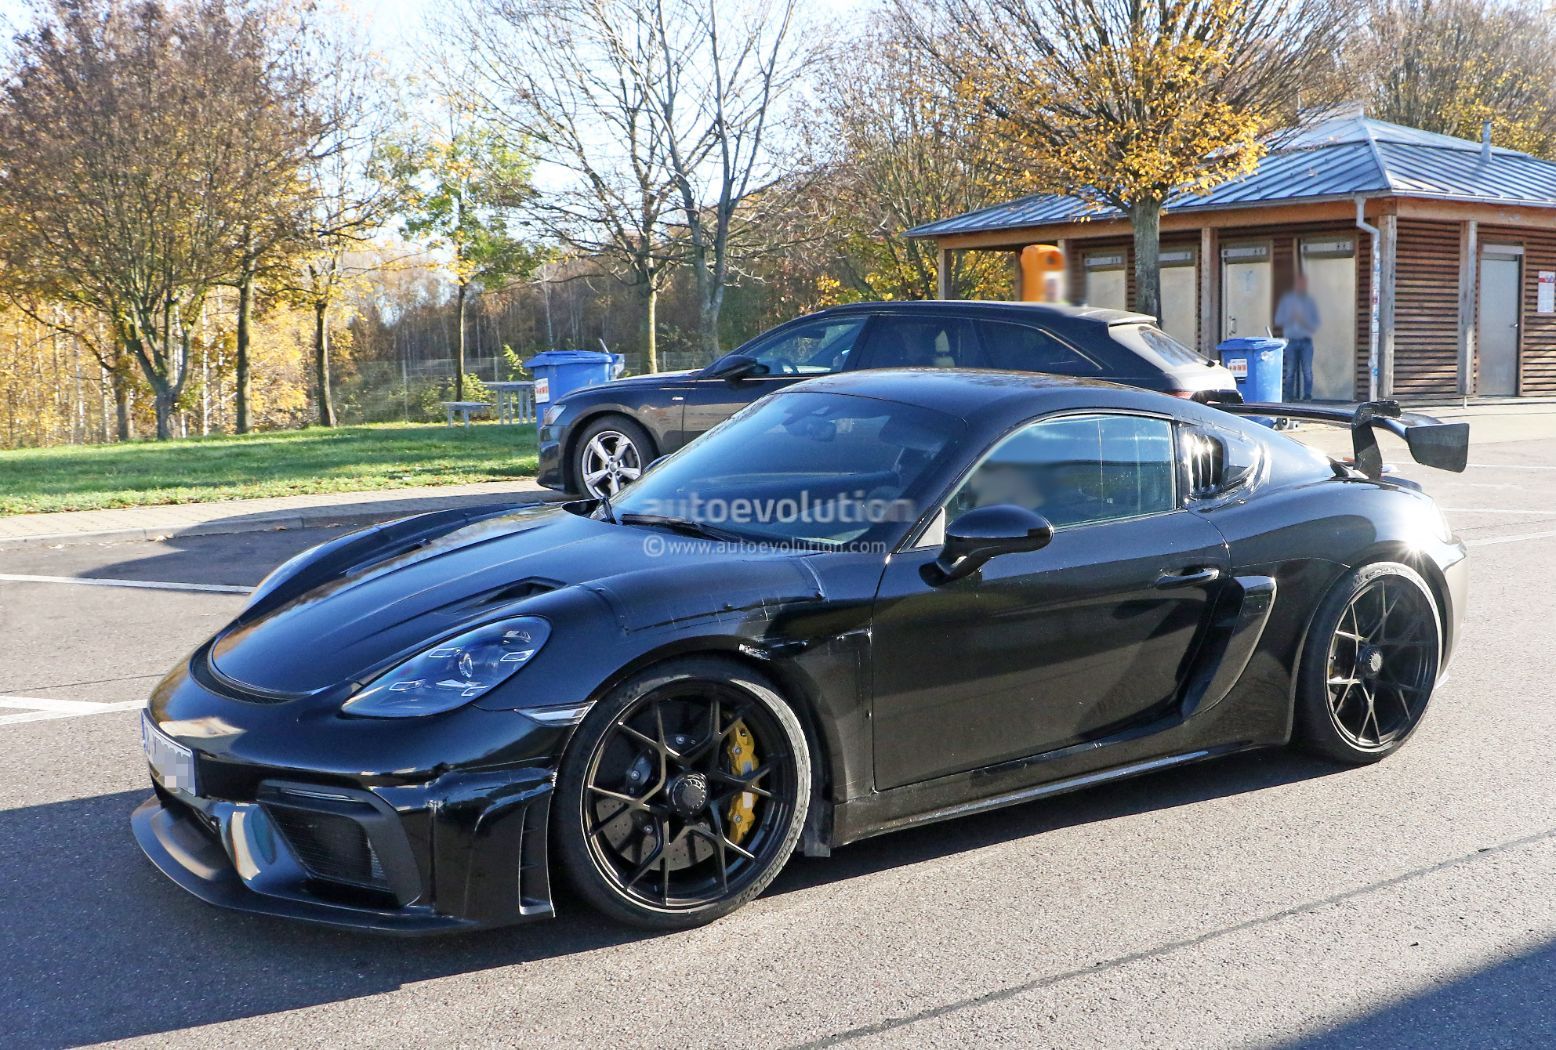 22 Porsche 718 Cayman Gt4 Rs Will Be The Most Powerful Cayman Ever Autoevolution